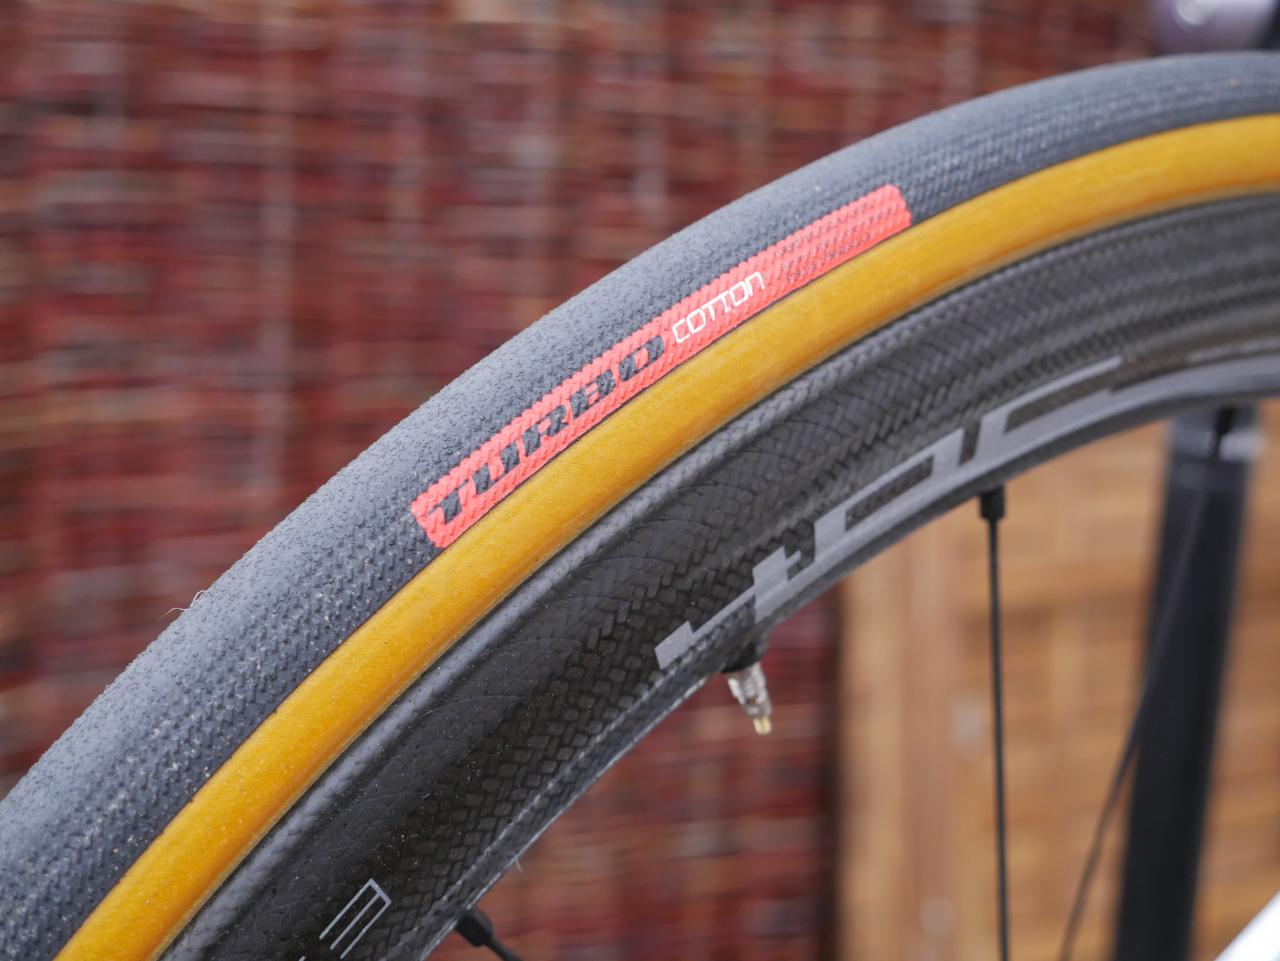 Review: Specialized Turbo Cotton tyre